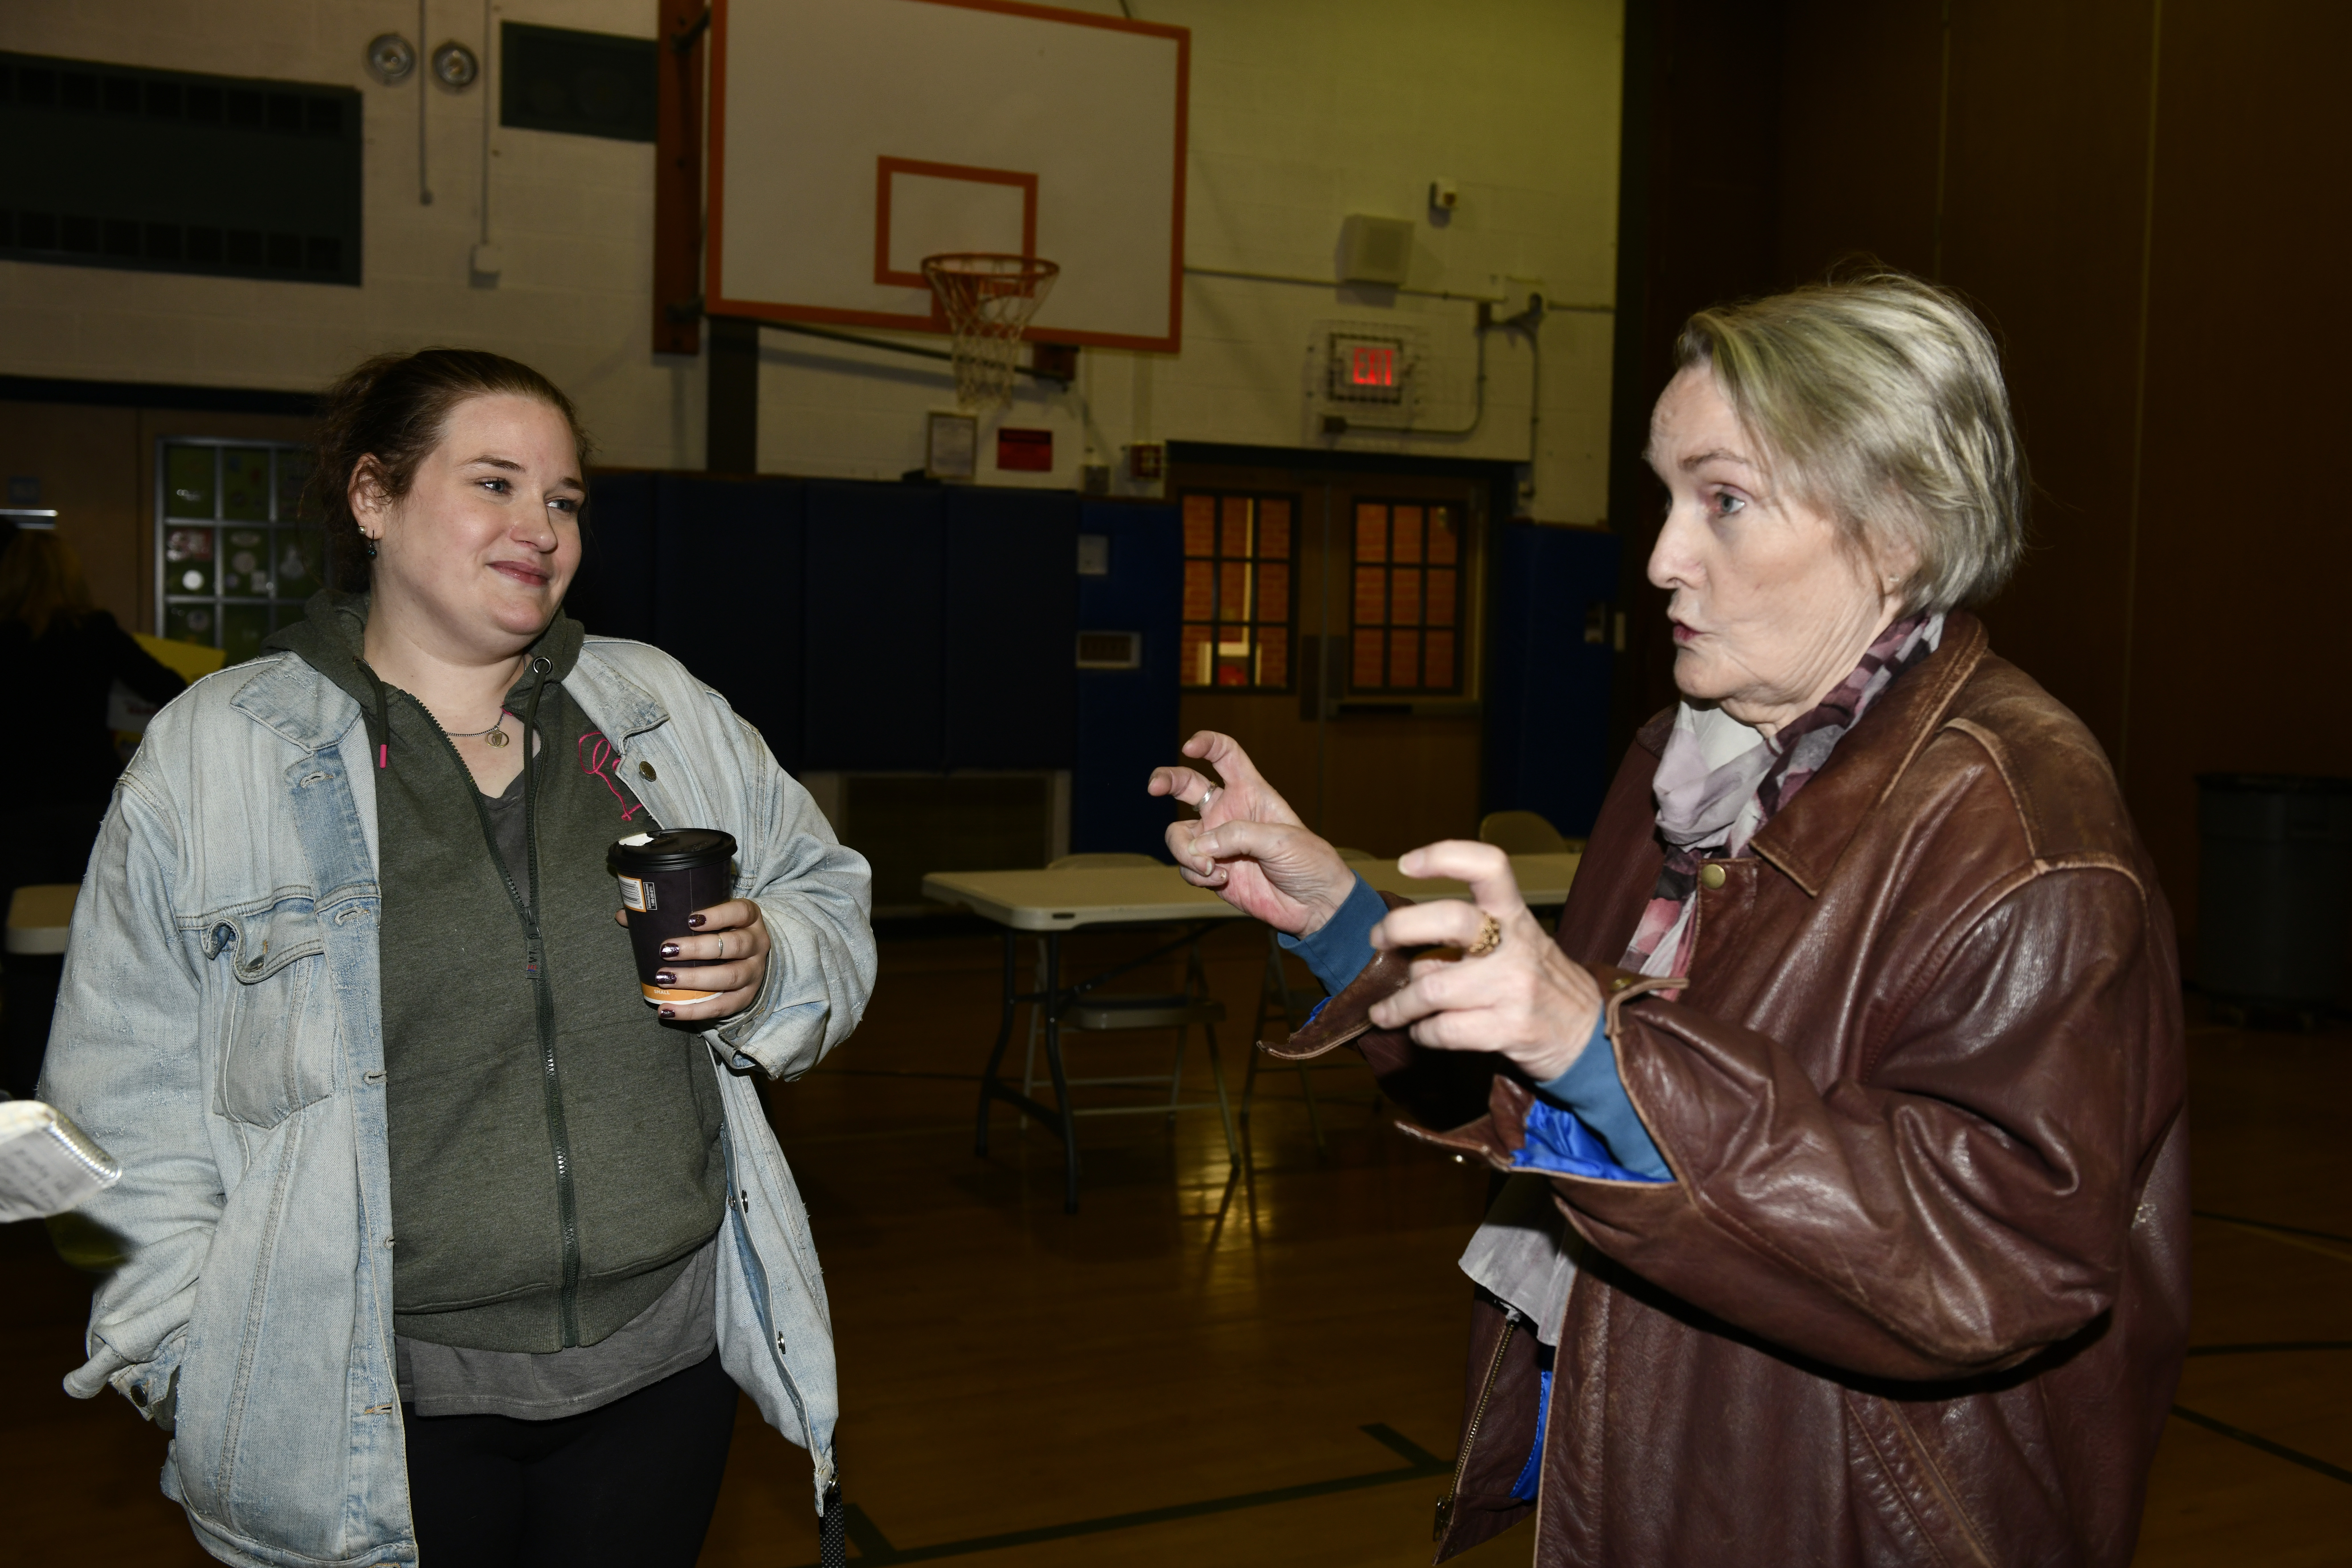 Meghan and Bernadette McDonough at the East Quogue School on Thursday night.  DANA SHAW